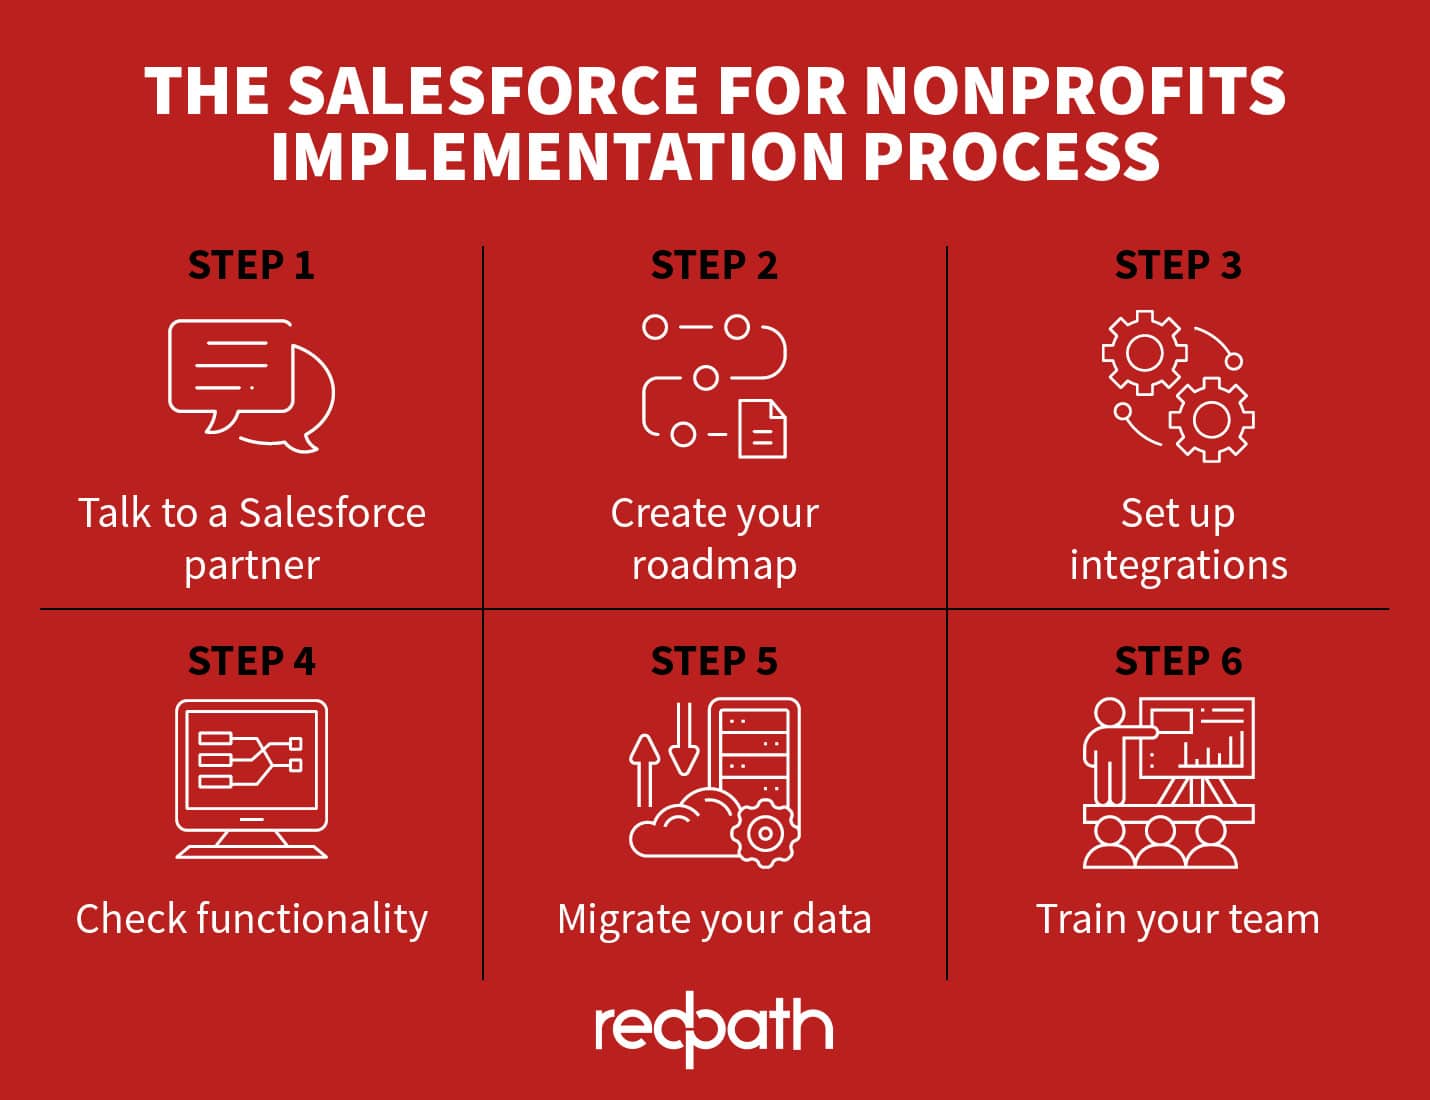 This image and the sections below provide an overview of the steps in the Salesforce for Nonprofits implementation process. 